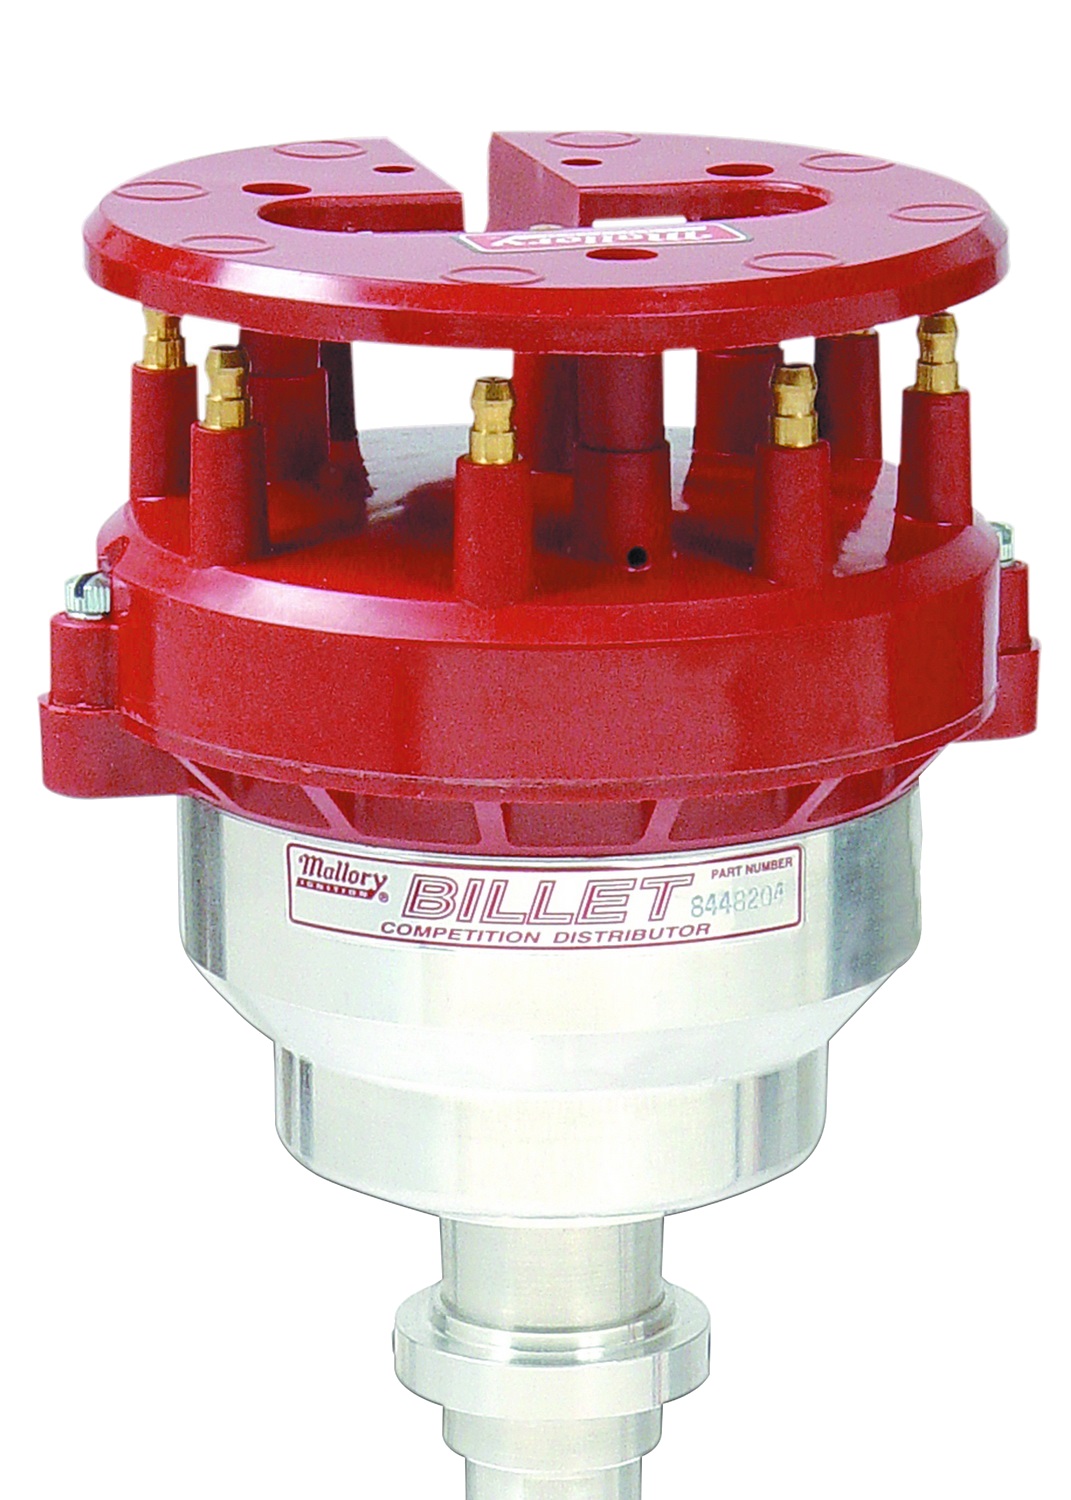 Mallory Mallory 8457905 84 Series; Billet Competition Distributor